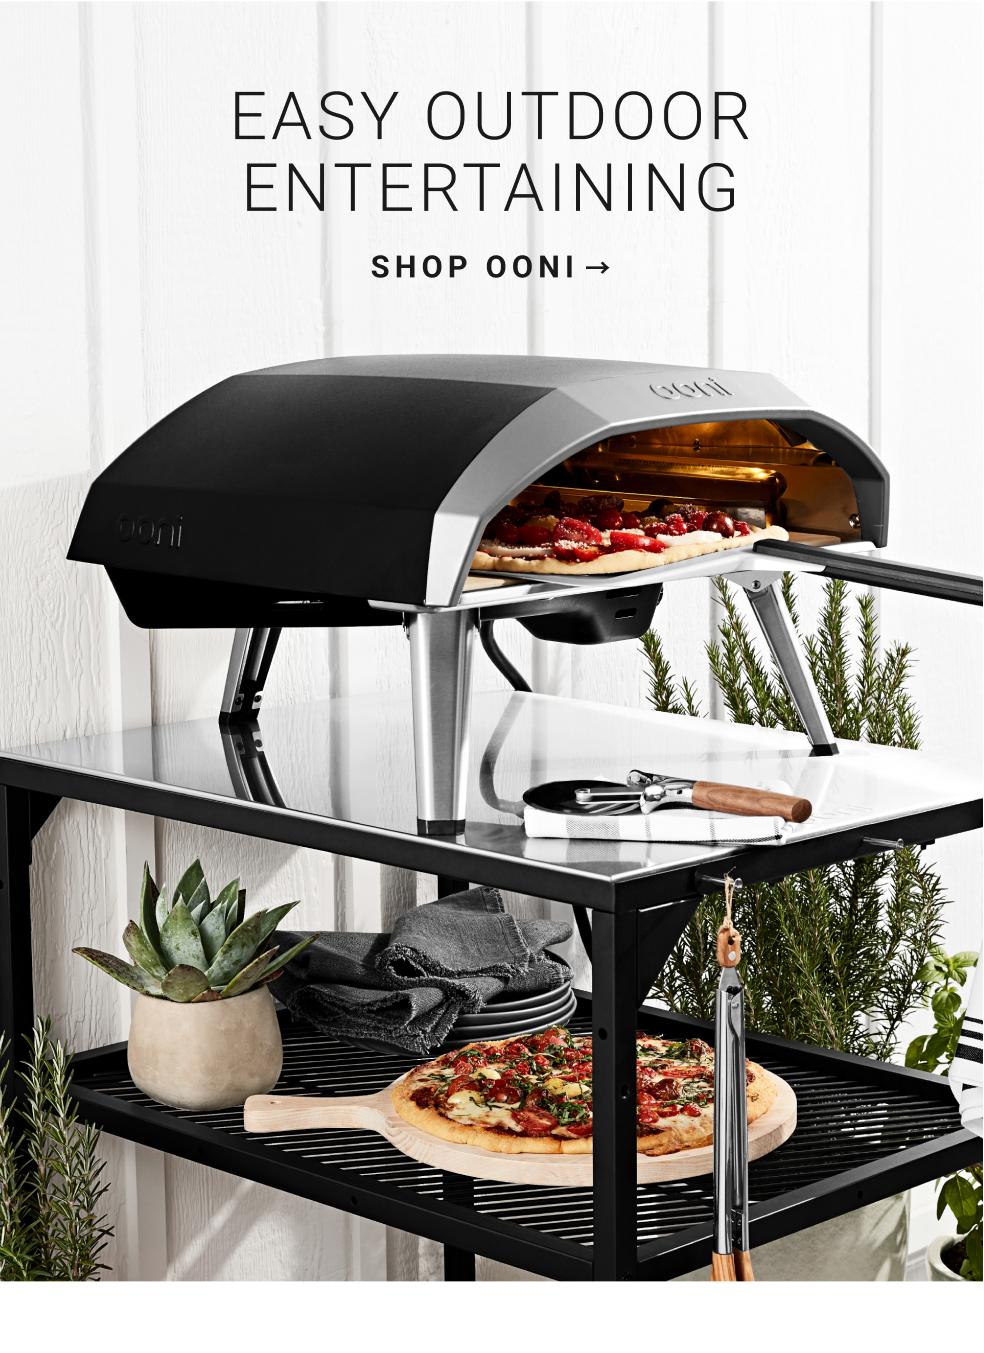 Easy Outdoor Entertaining | Fire up the pizza oven and enjoy carefree catch-ups with party-proof essentials. | Shop Now